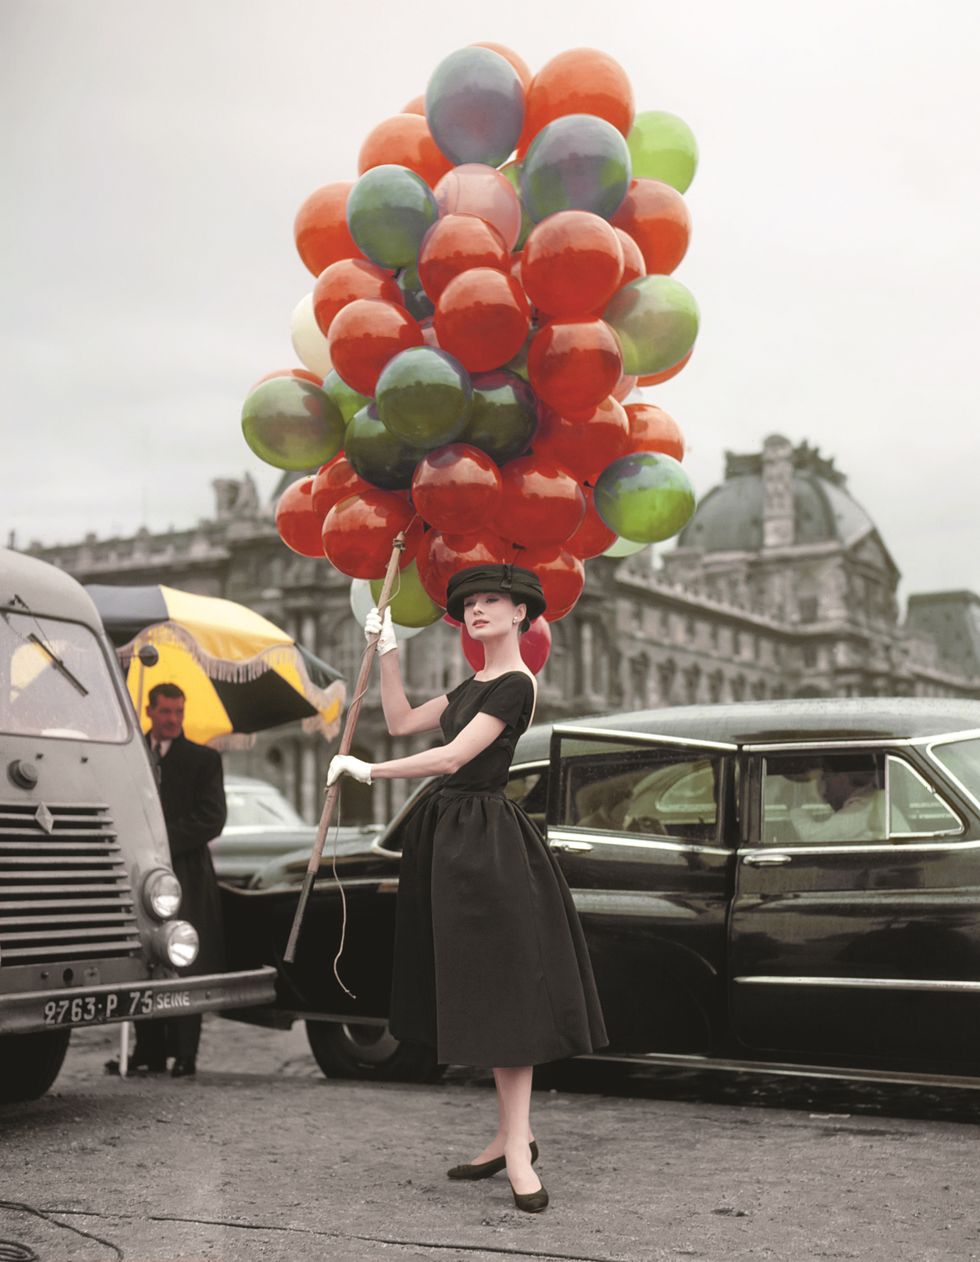 Automotive design, Balloon, Party supply, Dress, Classic car, Grille, Photography, Classic, Street fashion, Luxury vehicle, 